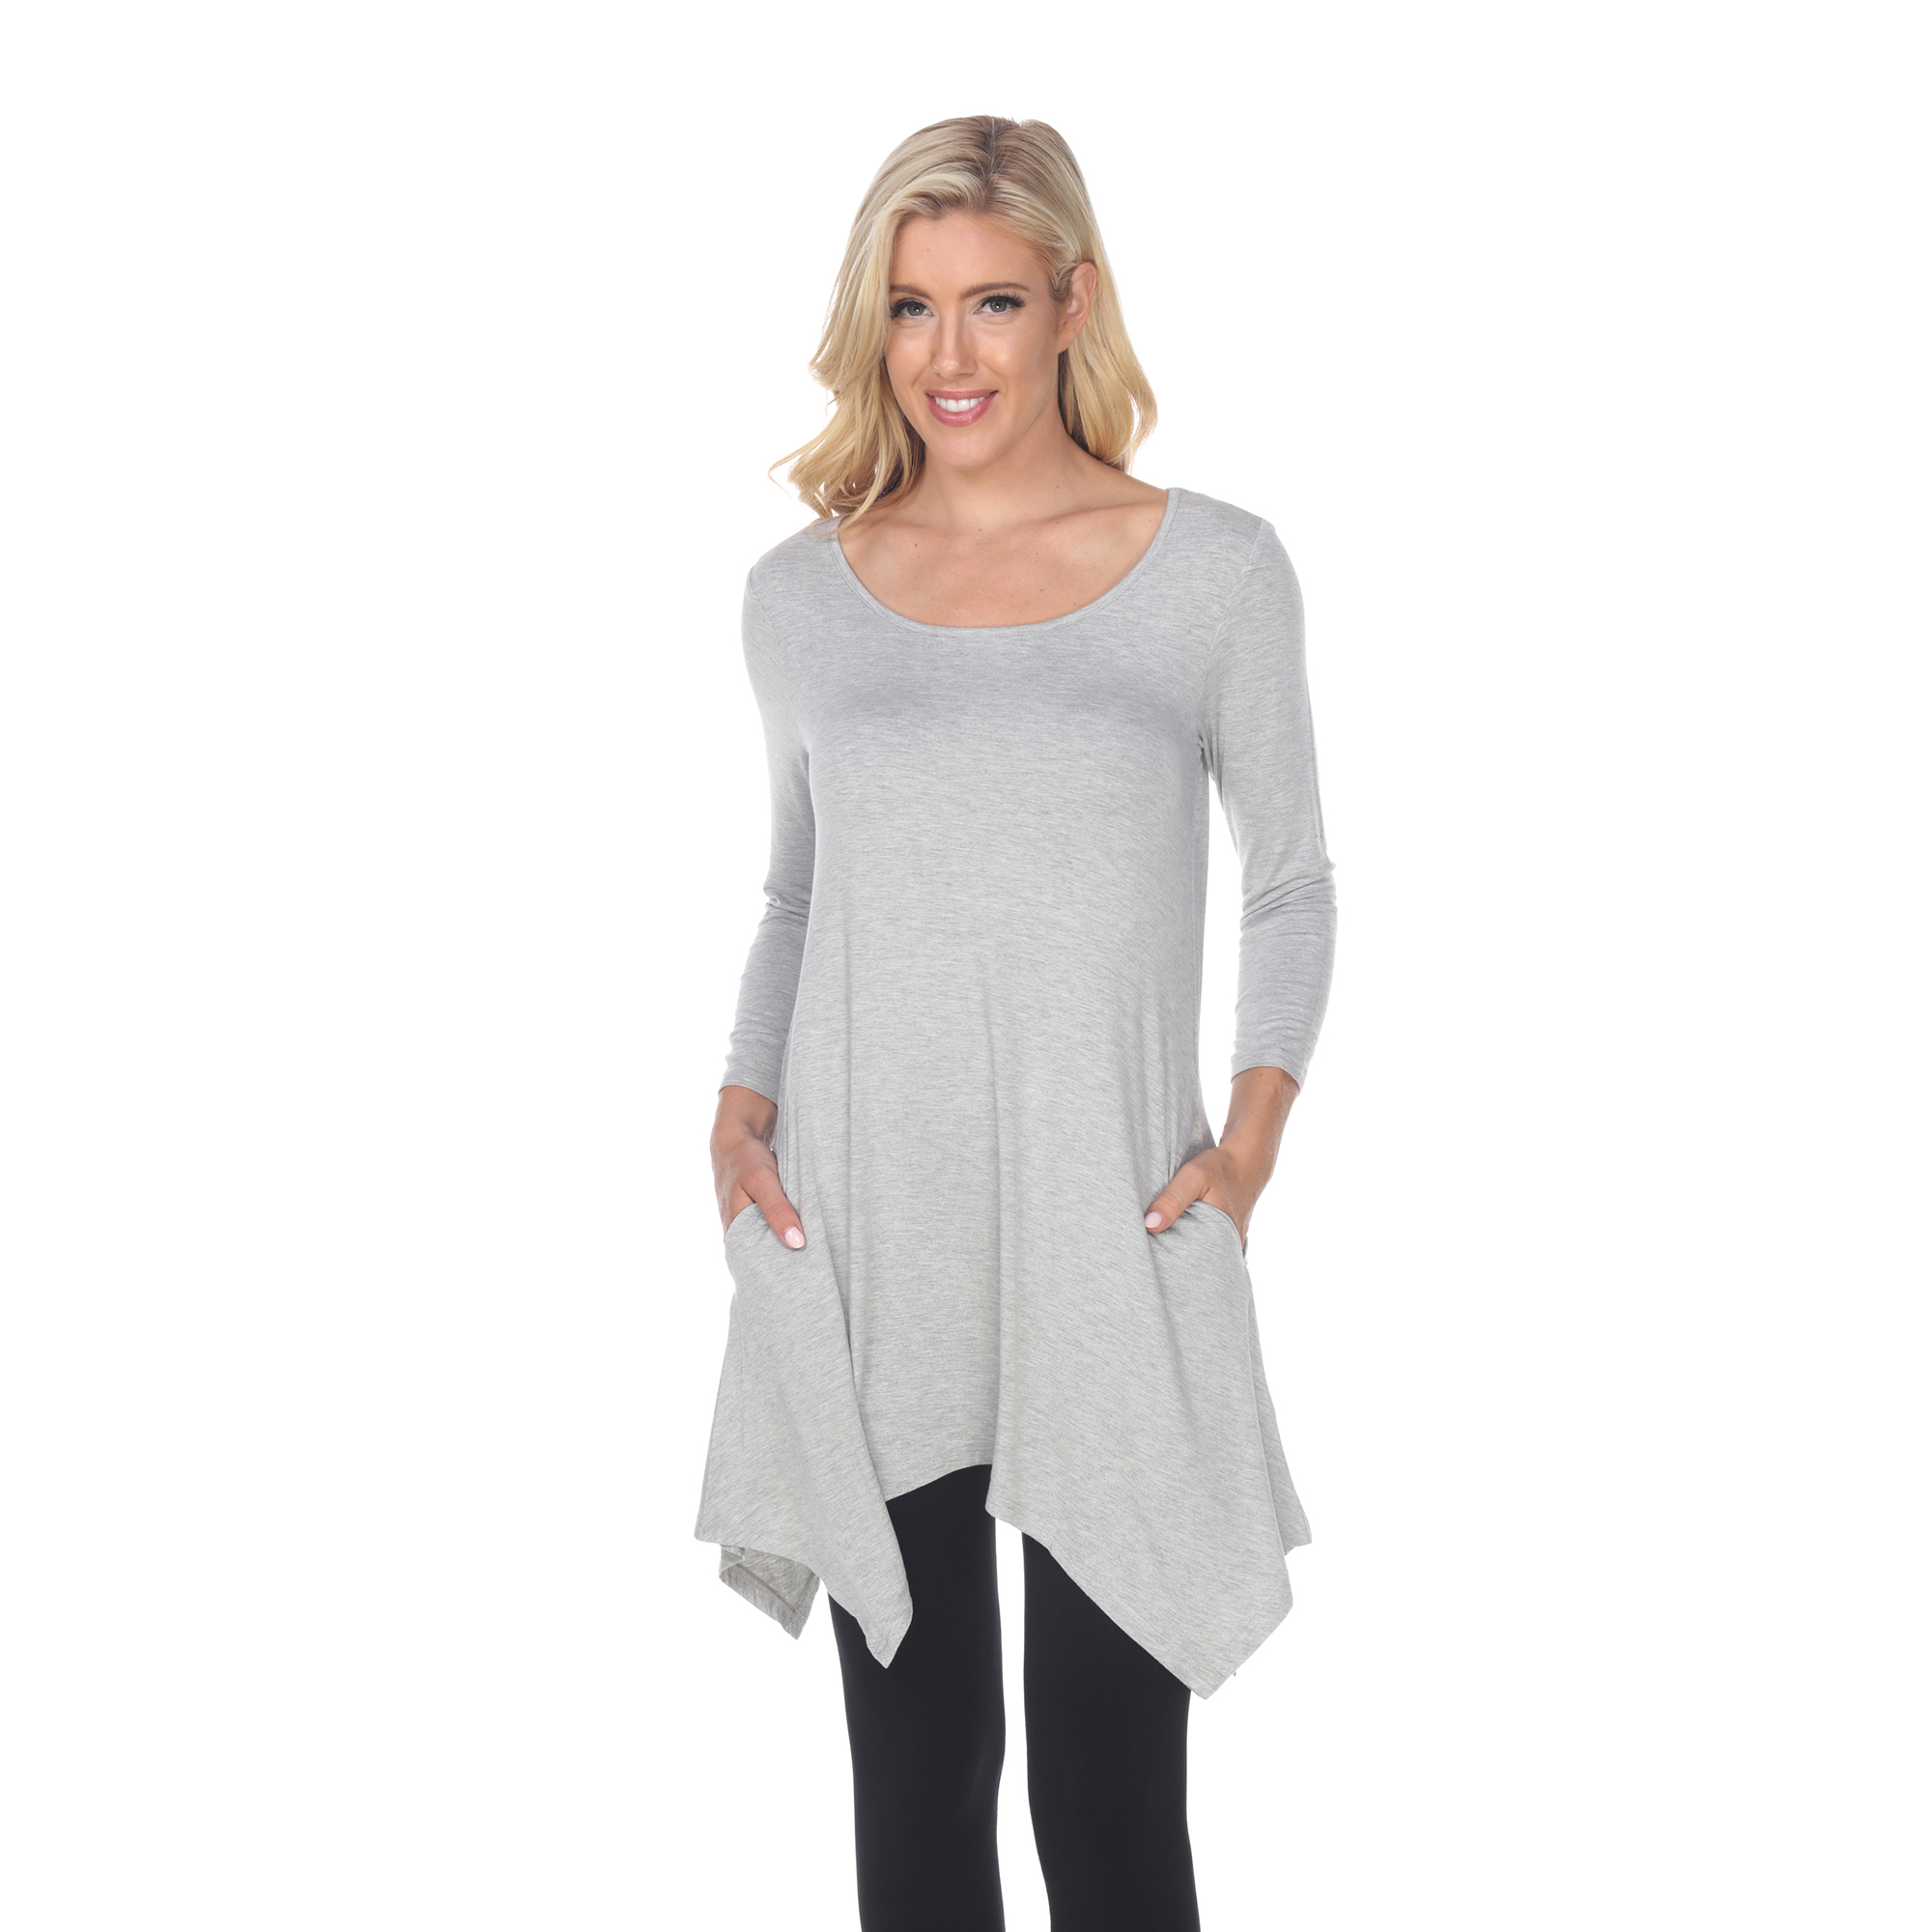 White Mark Women's Quarter Sleeve Tunic Top With Pockets - Heather Grey, Large